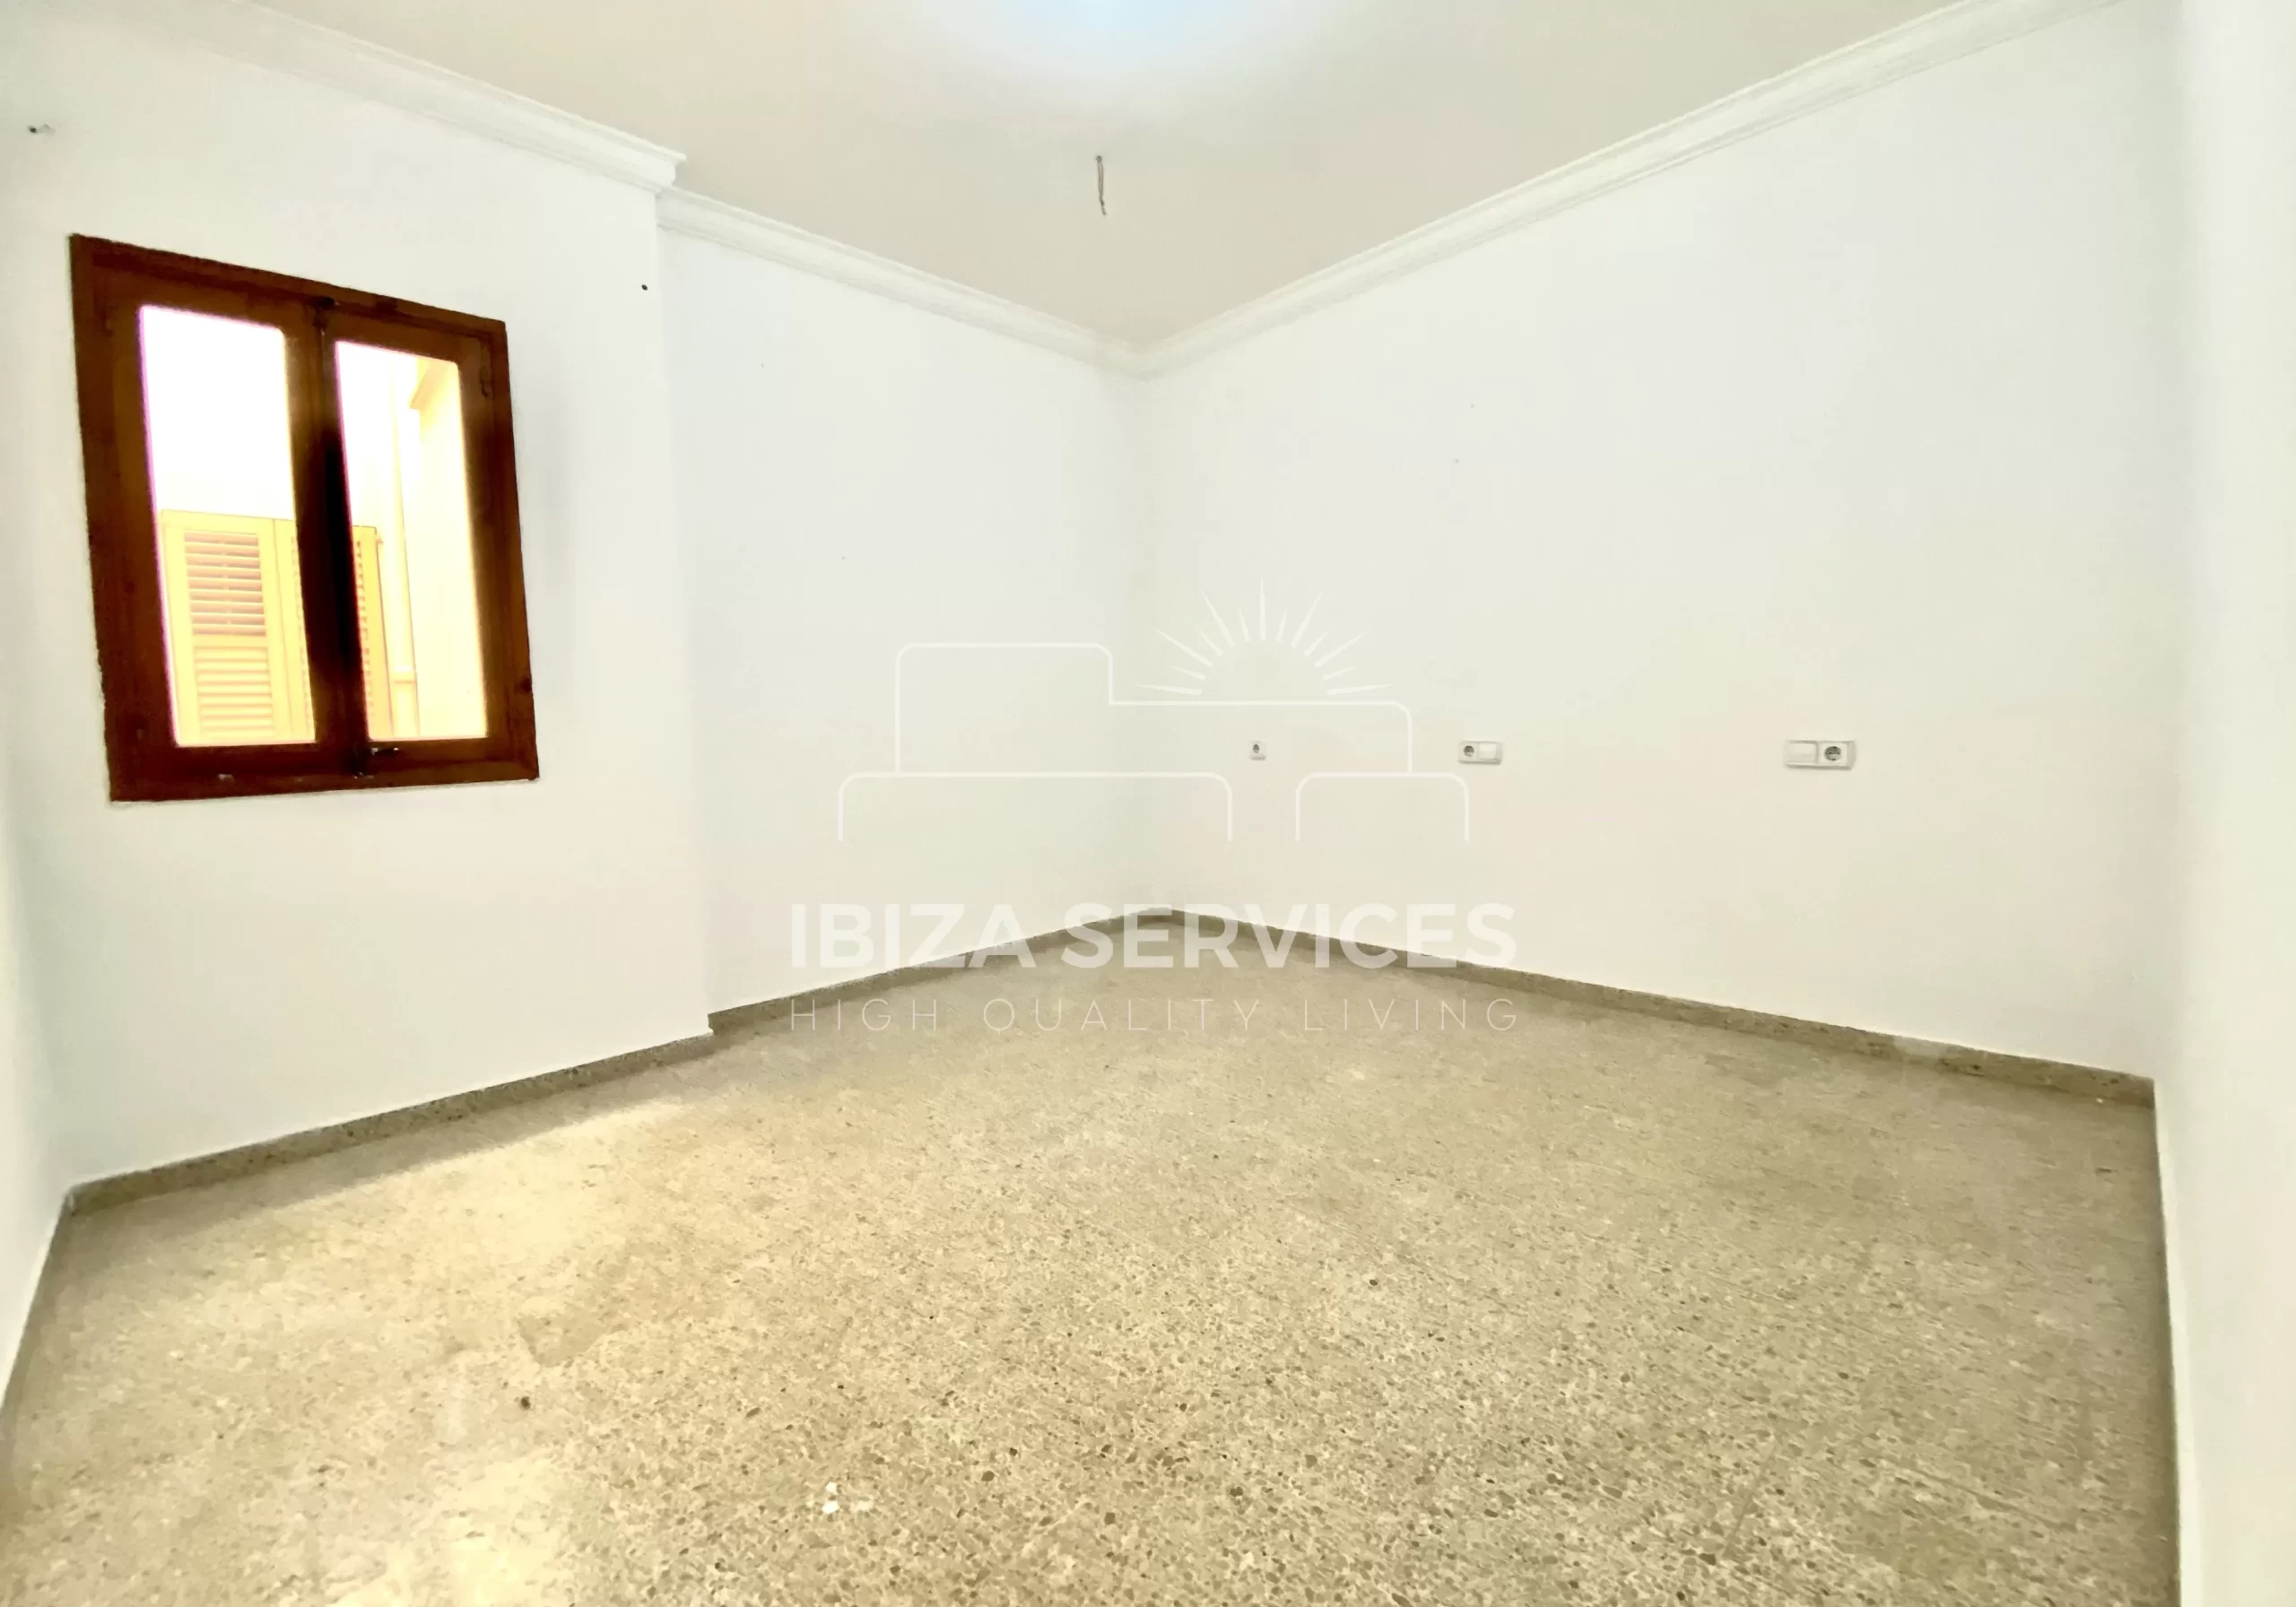 For sale 3 bedrooms apartment to renovate in Ibiza city